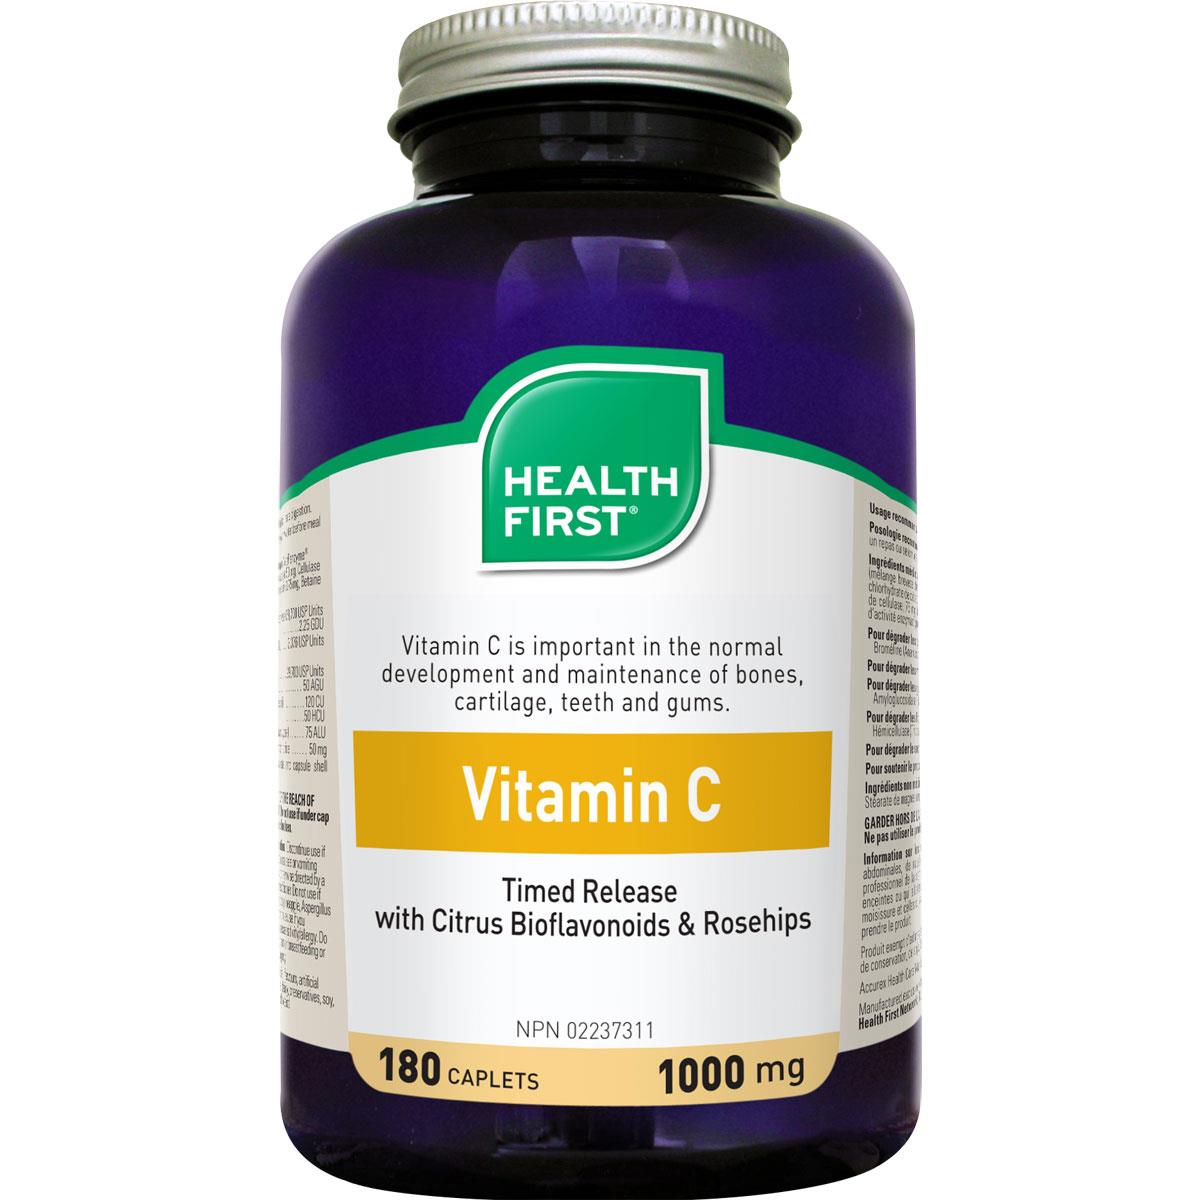 Health First Vitamin C with Bioflavonoids & Rosehips, 1000mg - 180 Caps (Timed Release)